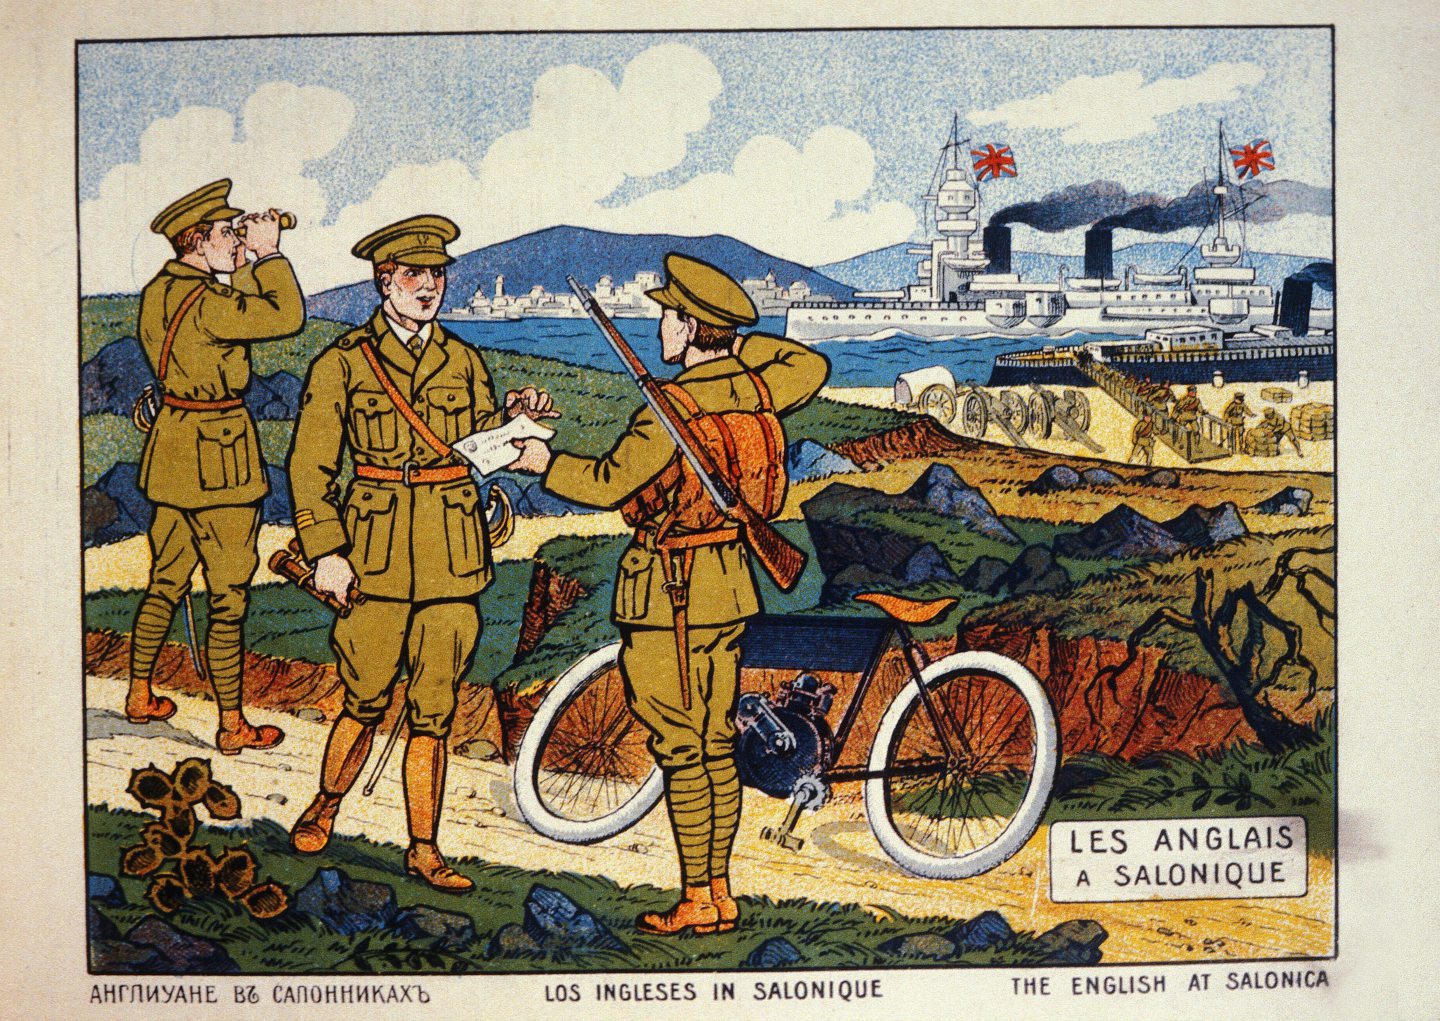 A colourful war poster showing English troops with Salonika in the background. 